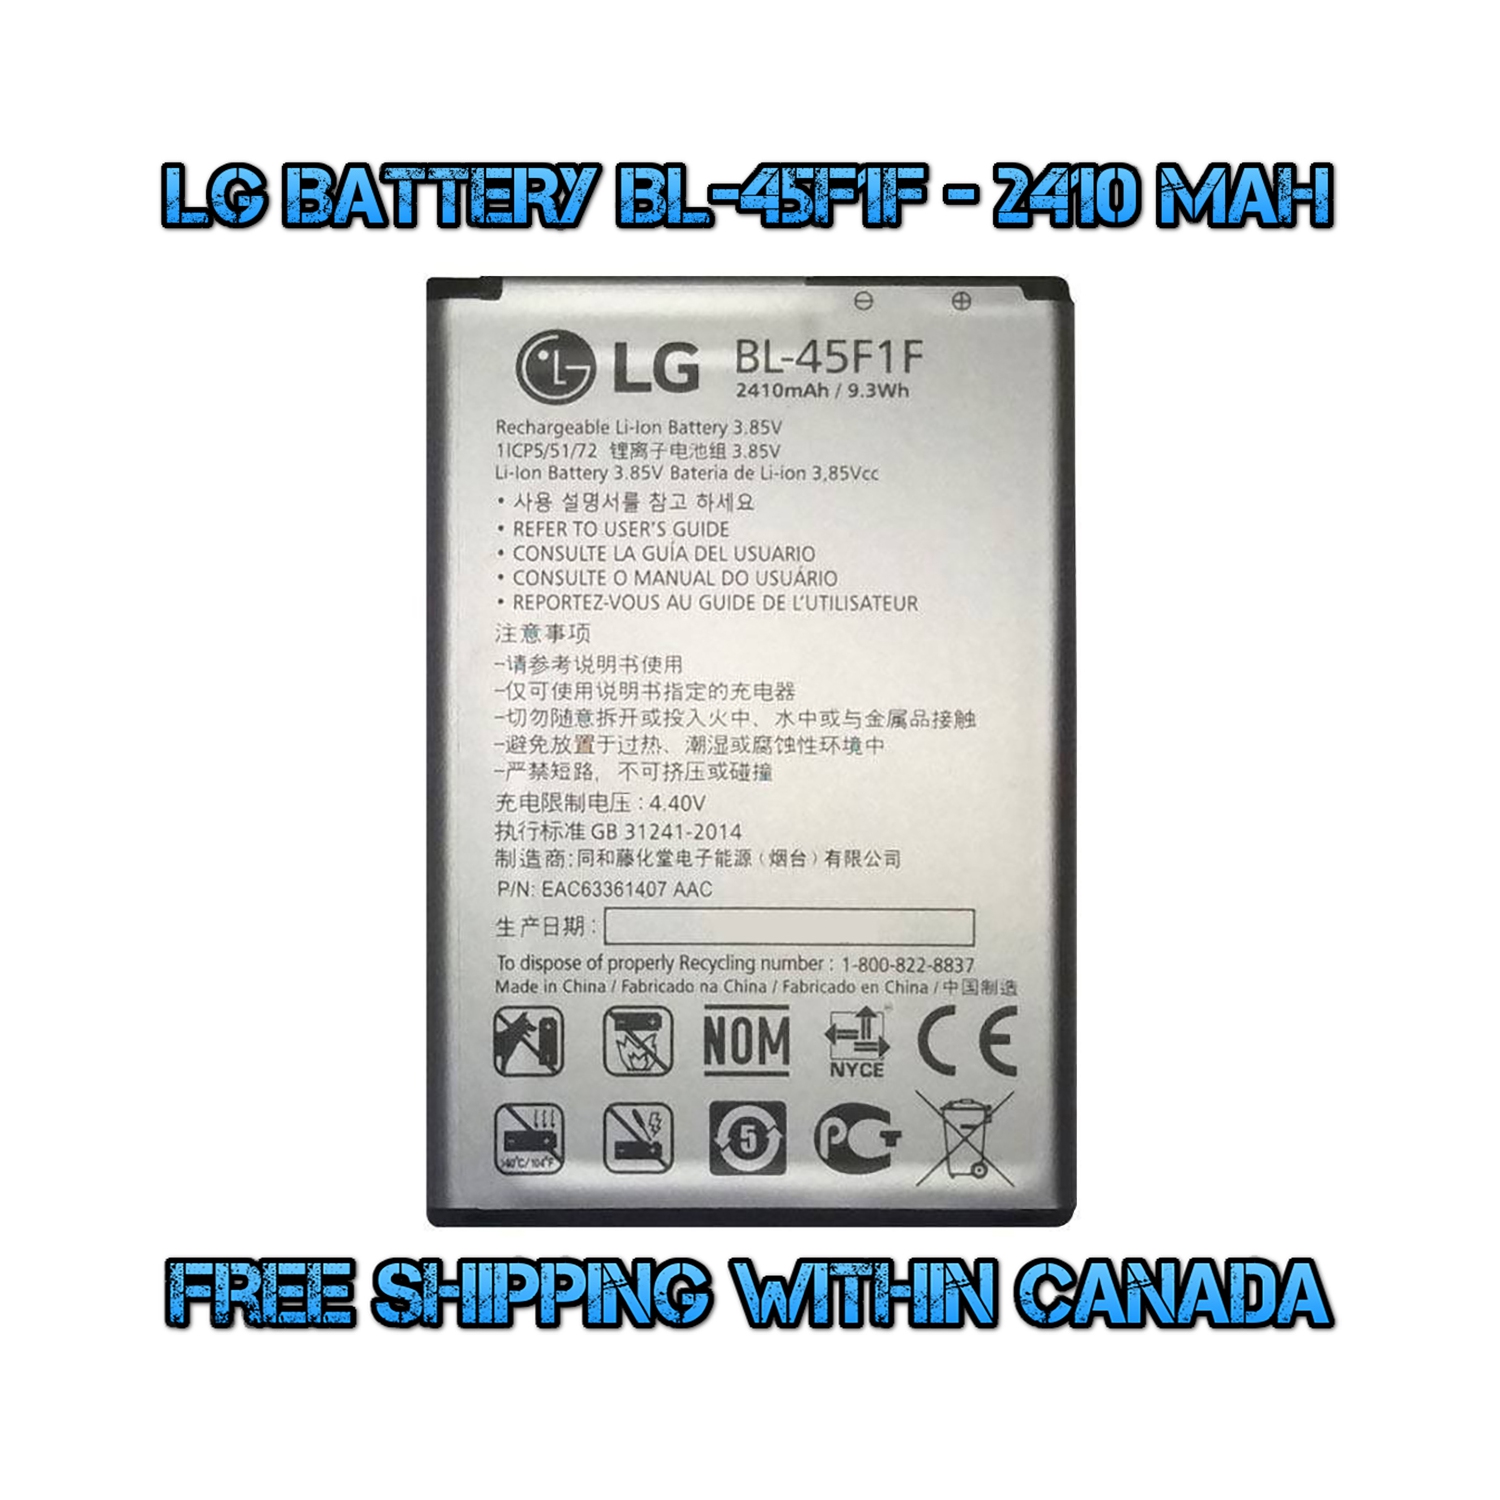 New OEM Replacement Battery Model BL-45F1F 2410 mAh for LG Phoenix 3 M150, Aristo MS210, Fortune M153 , K4 (2017) M151 - (FREE SHIPPING)